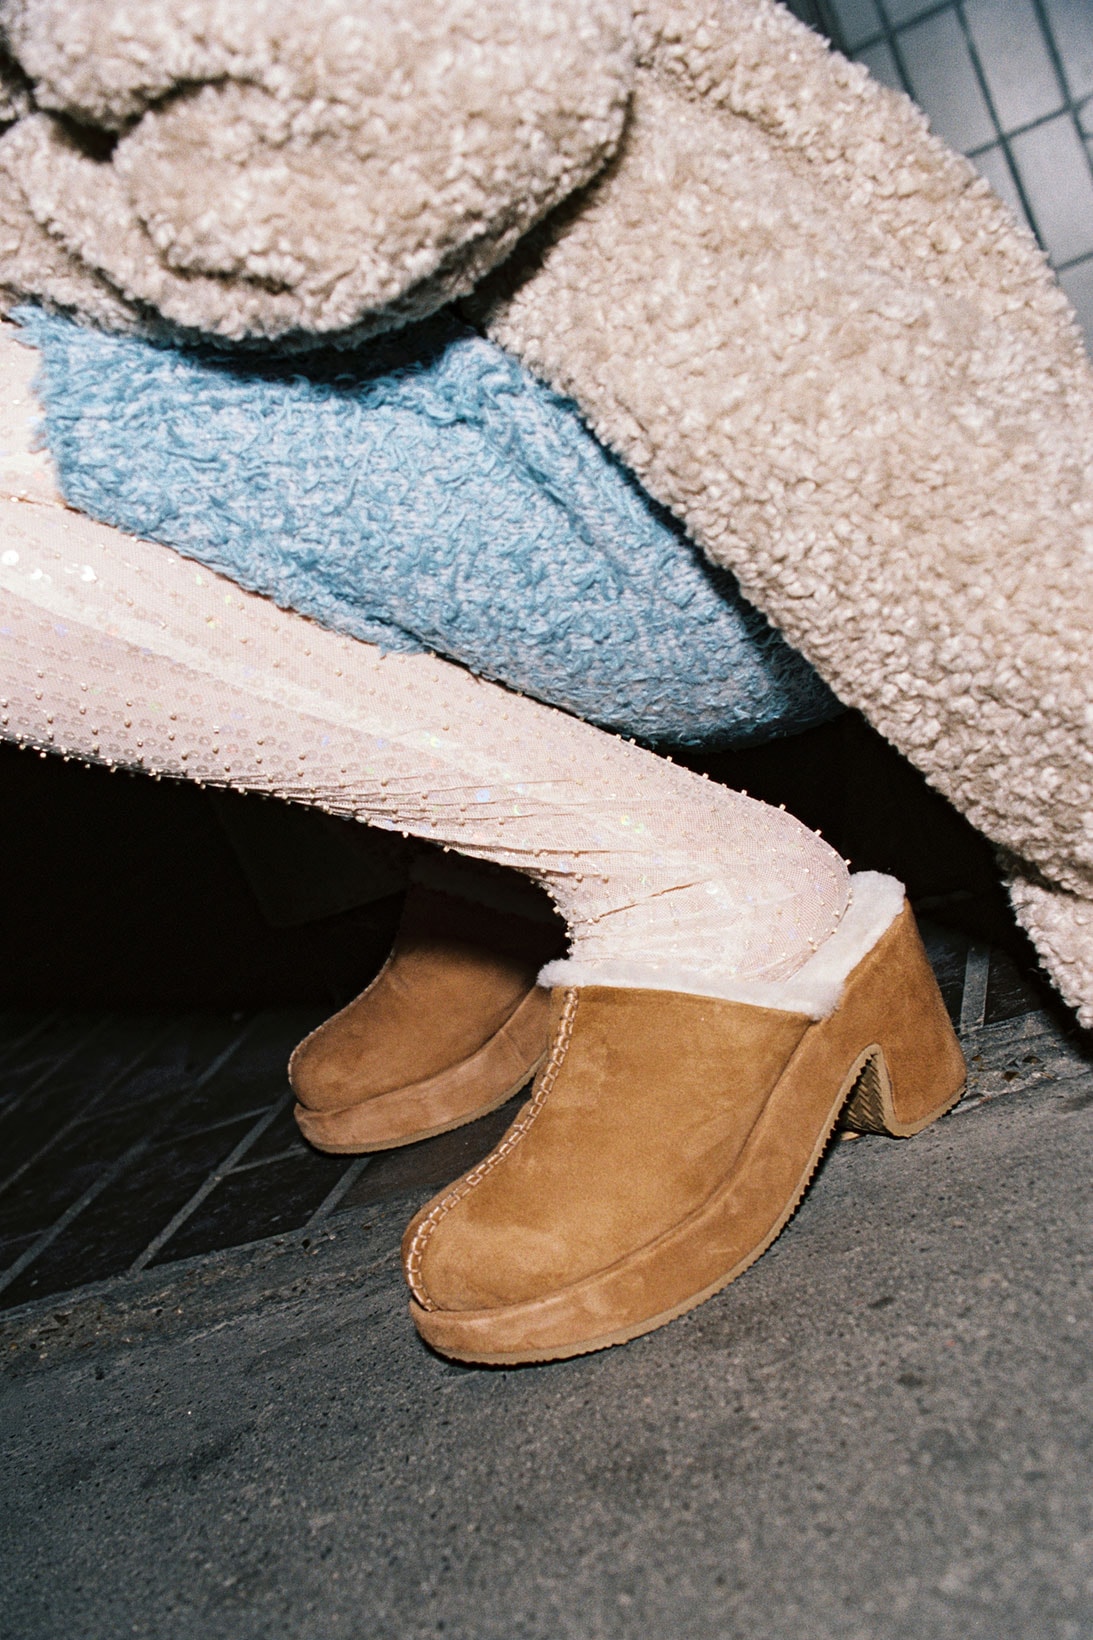 OSOI 2021 Special Holiday Collection Shearling Clogs